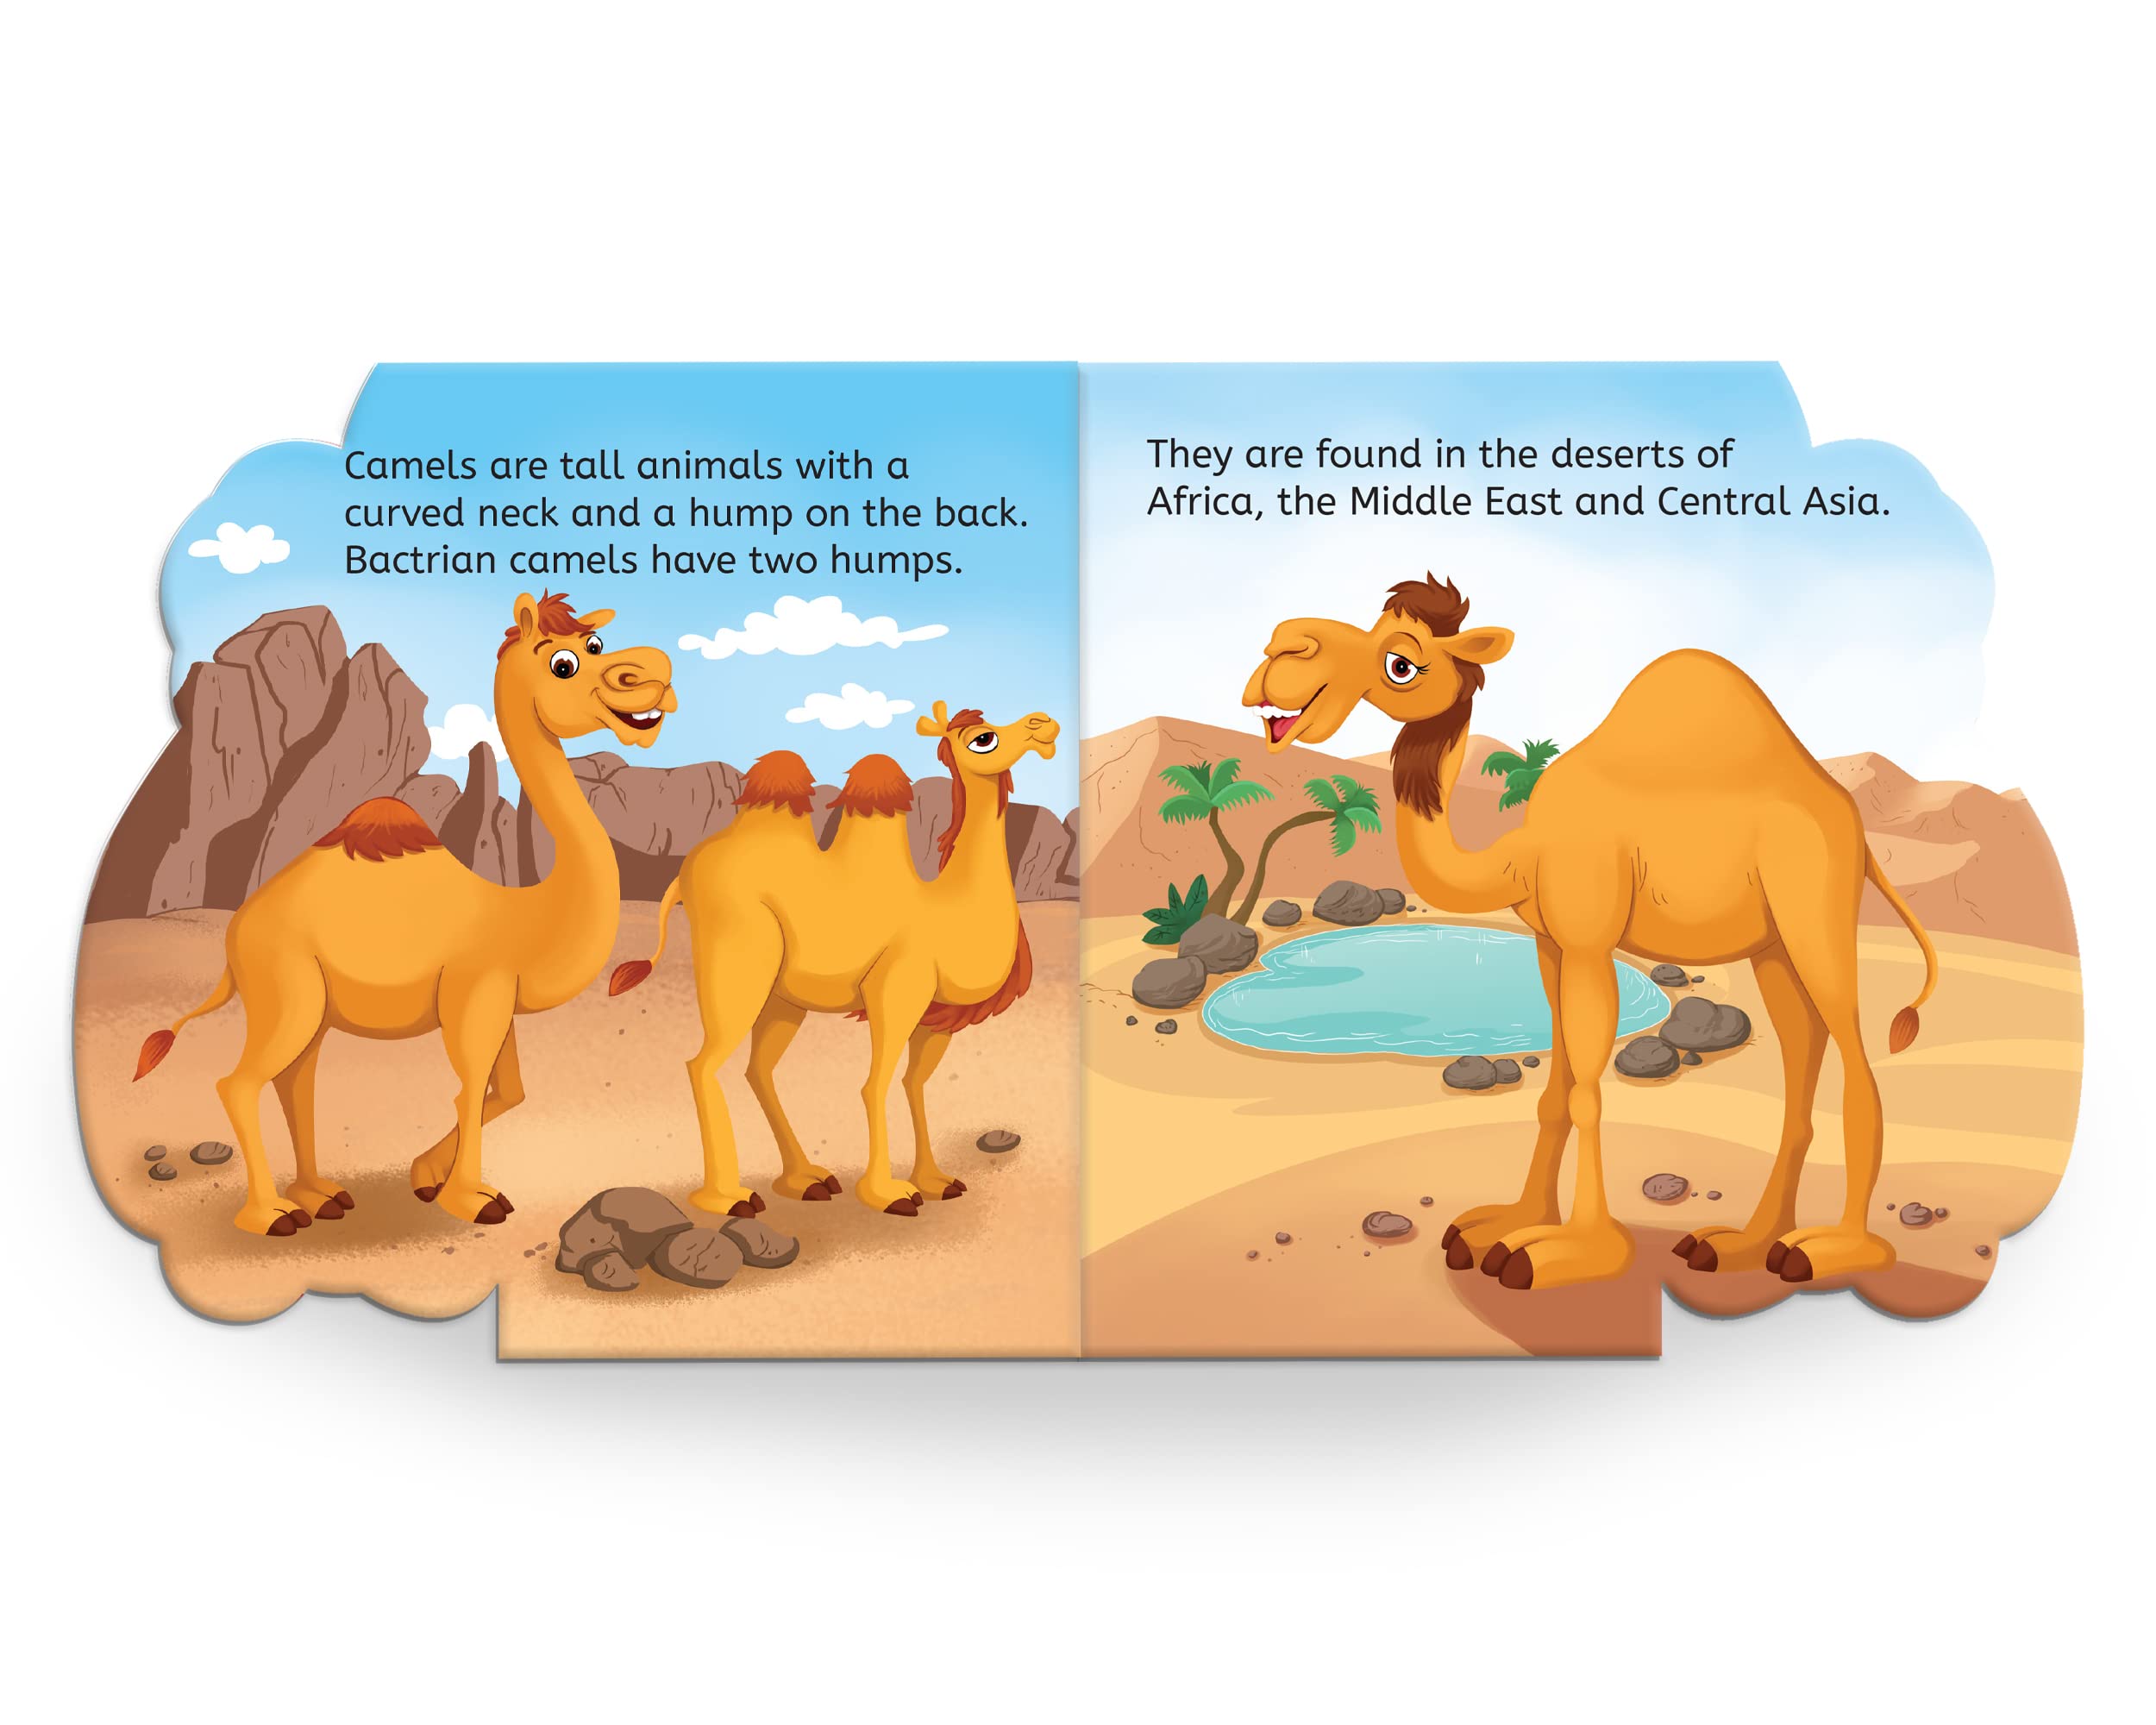 My First Shaped Board Book - Camel